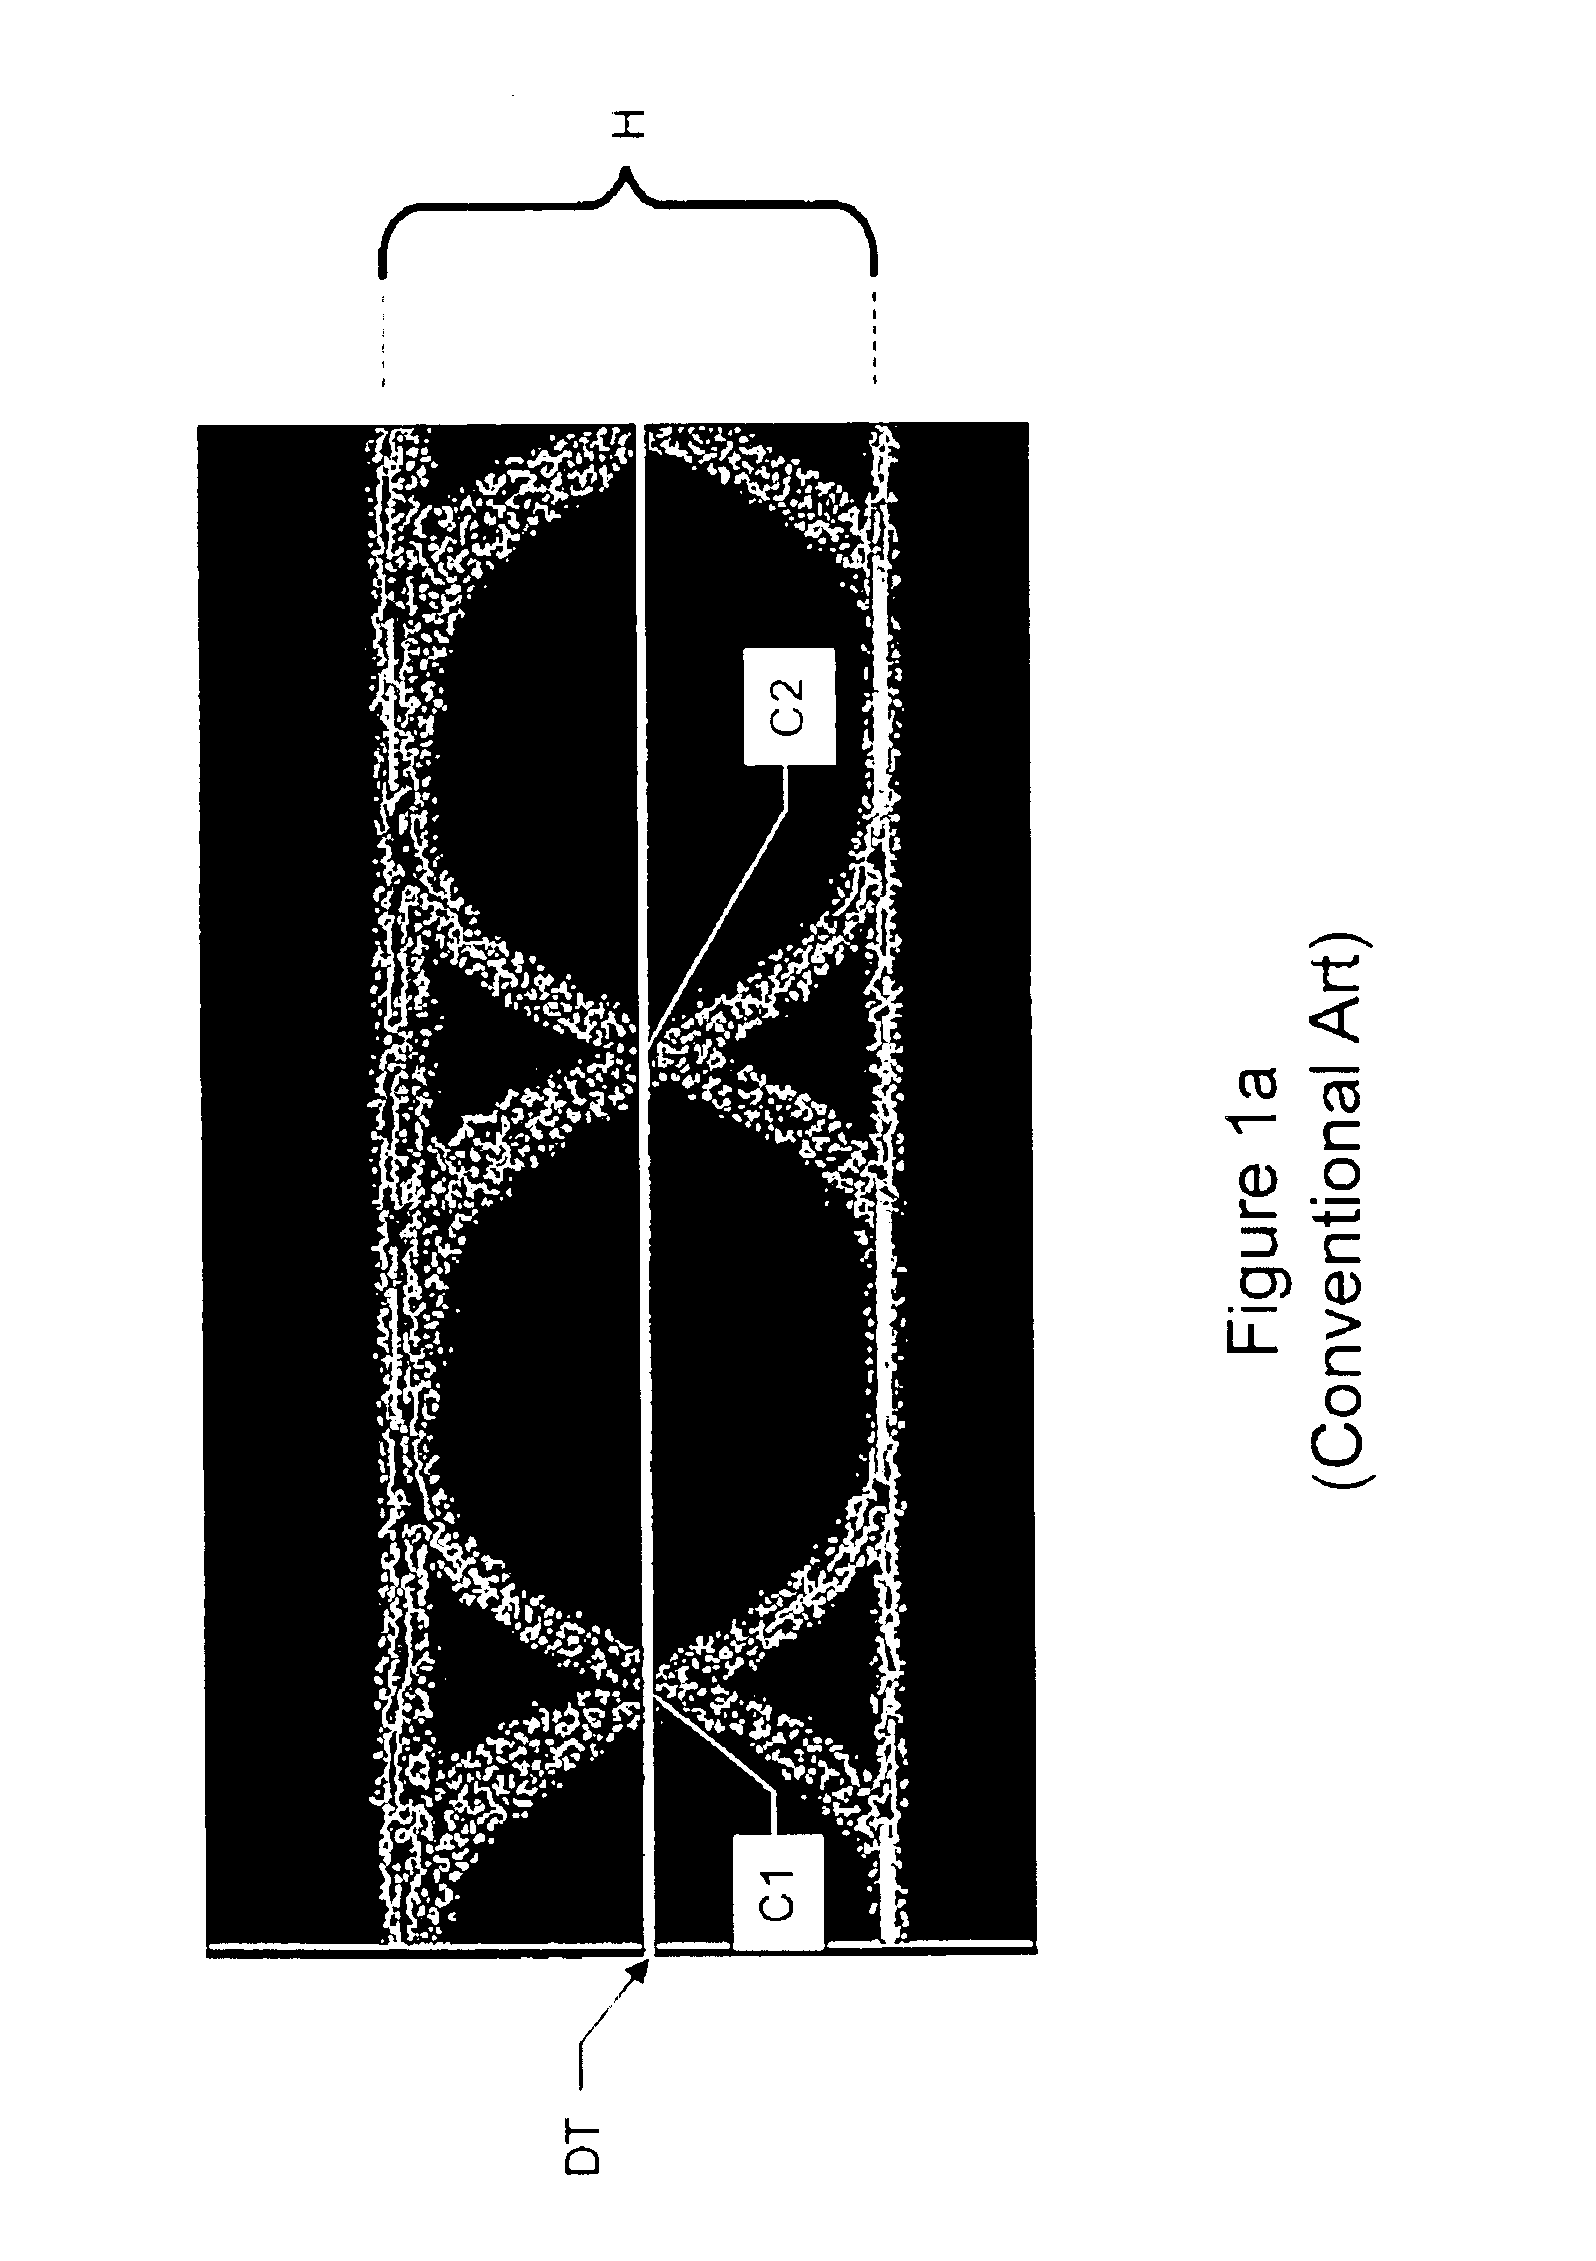 Optical signal receiver and method with decision threshold adjustment based on a relative percentage error indicator